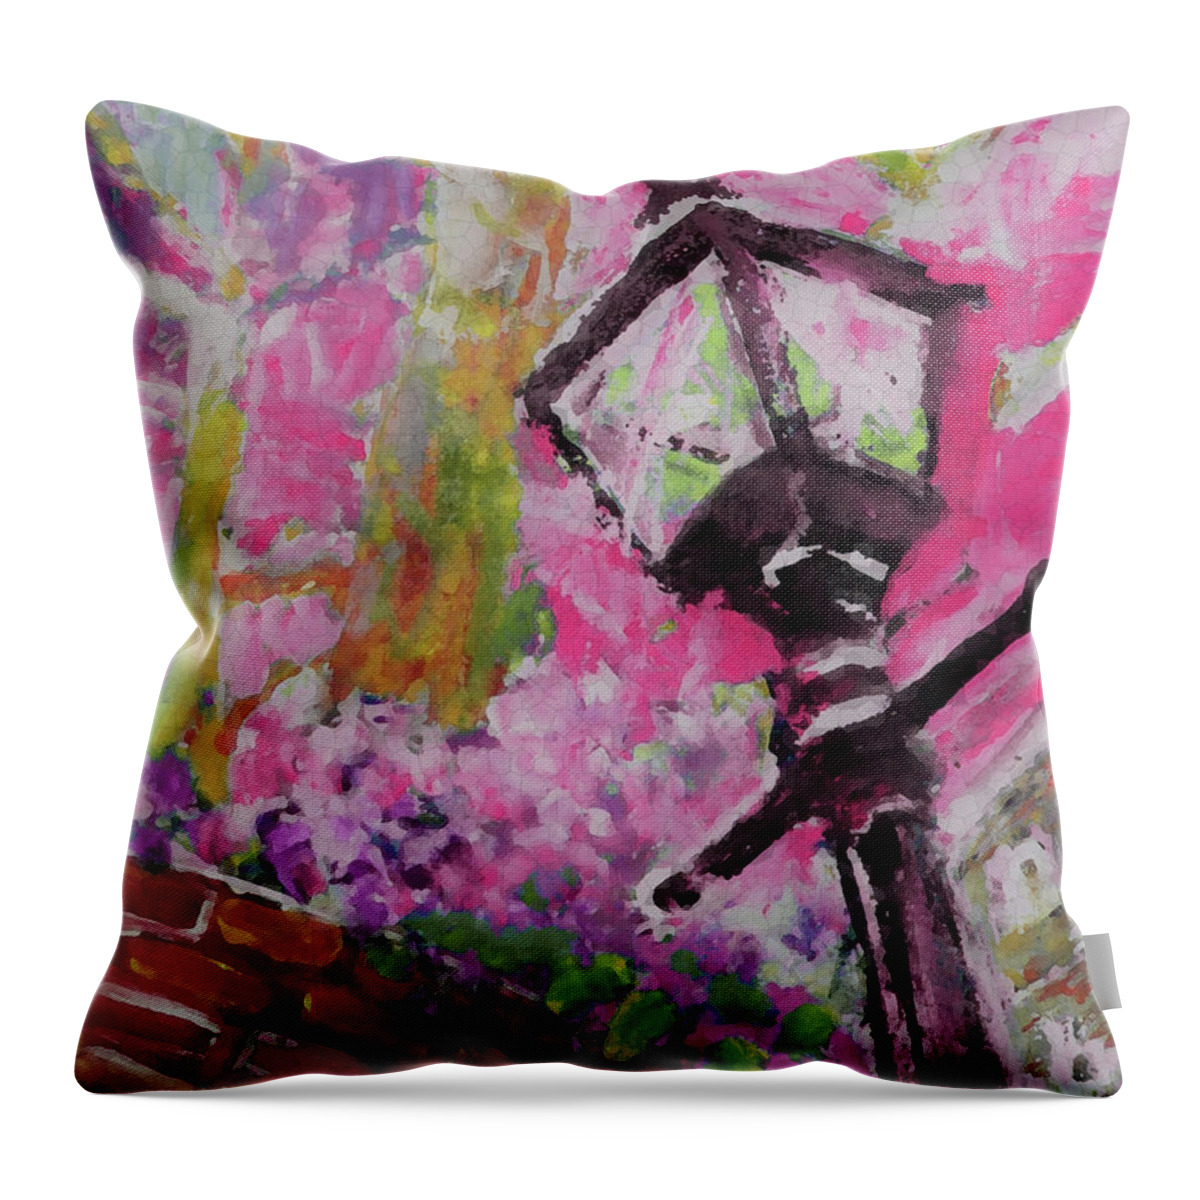 Pink Throw Pillow featuring the painting Ready For Pink Evenings by Lisa Kaiser